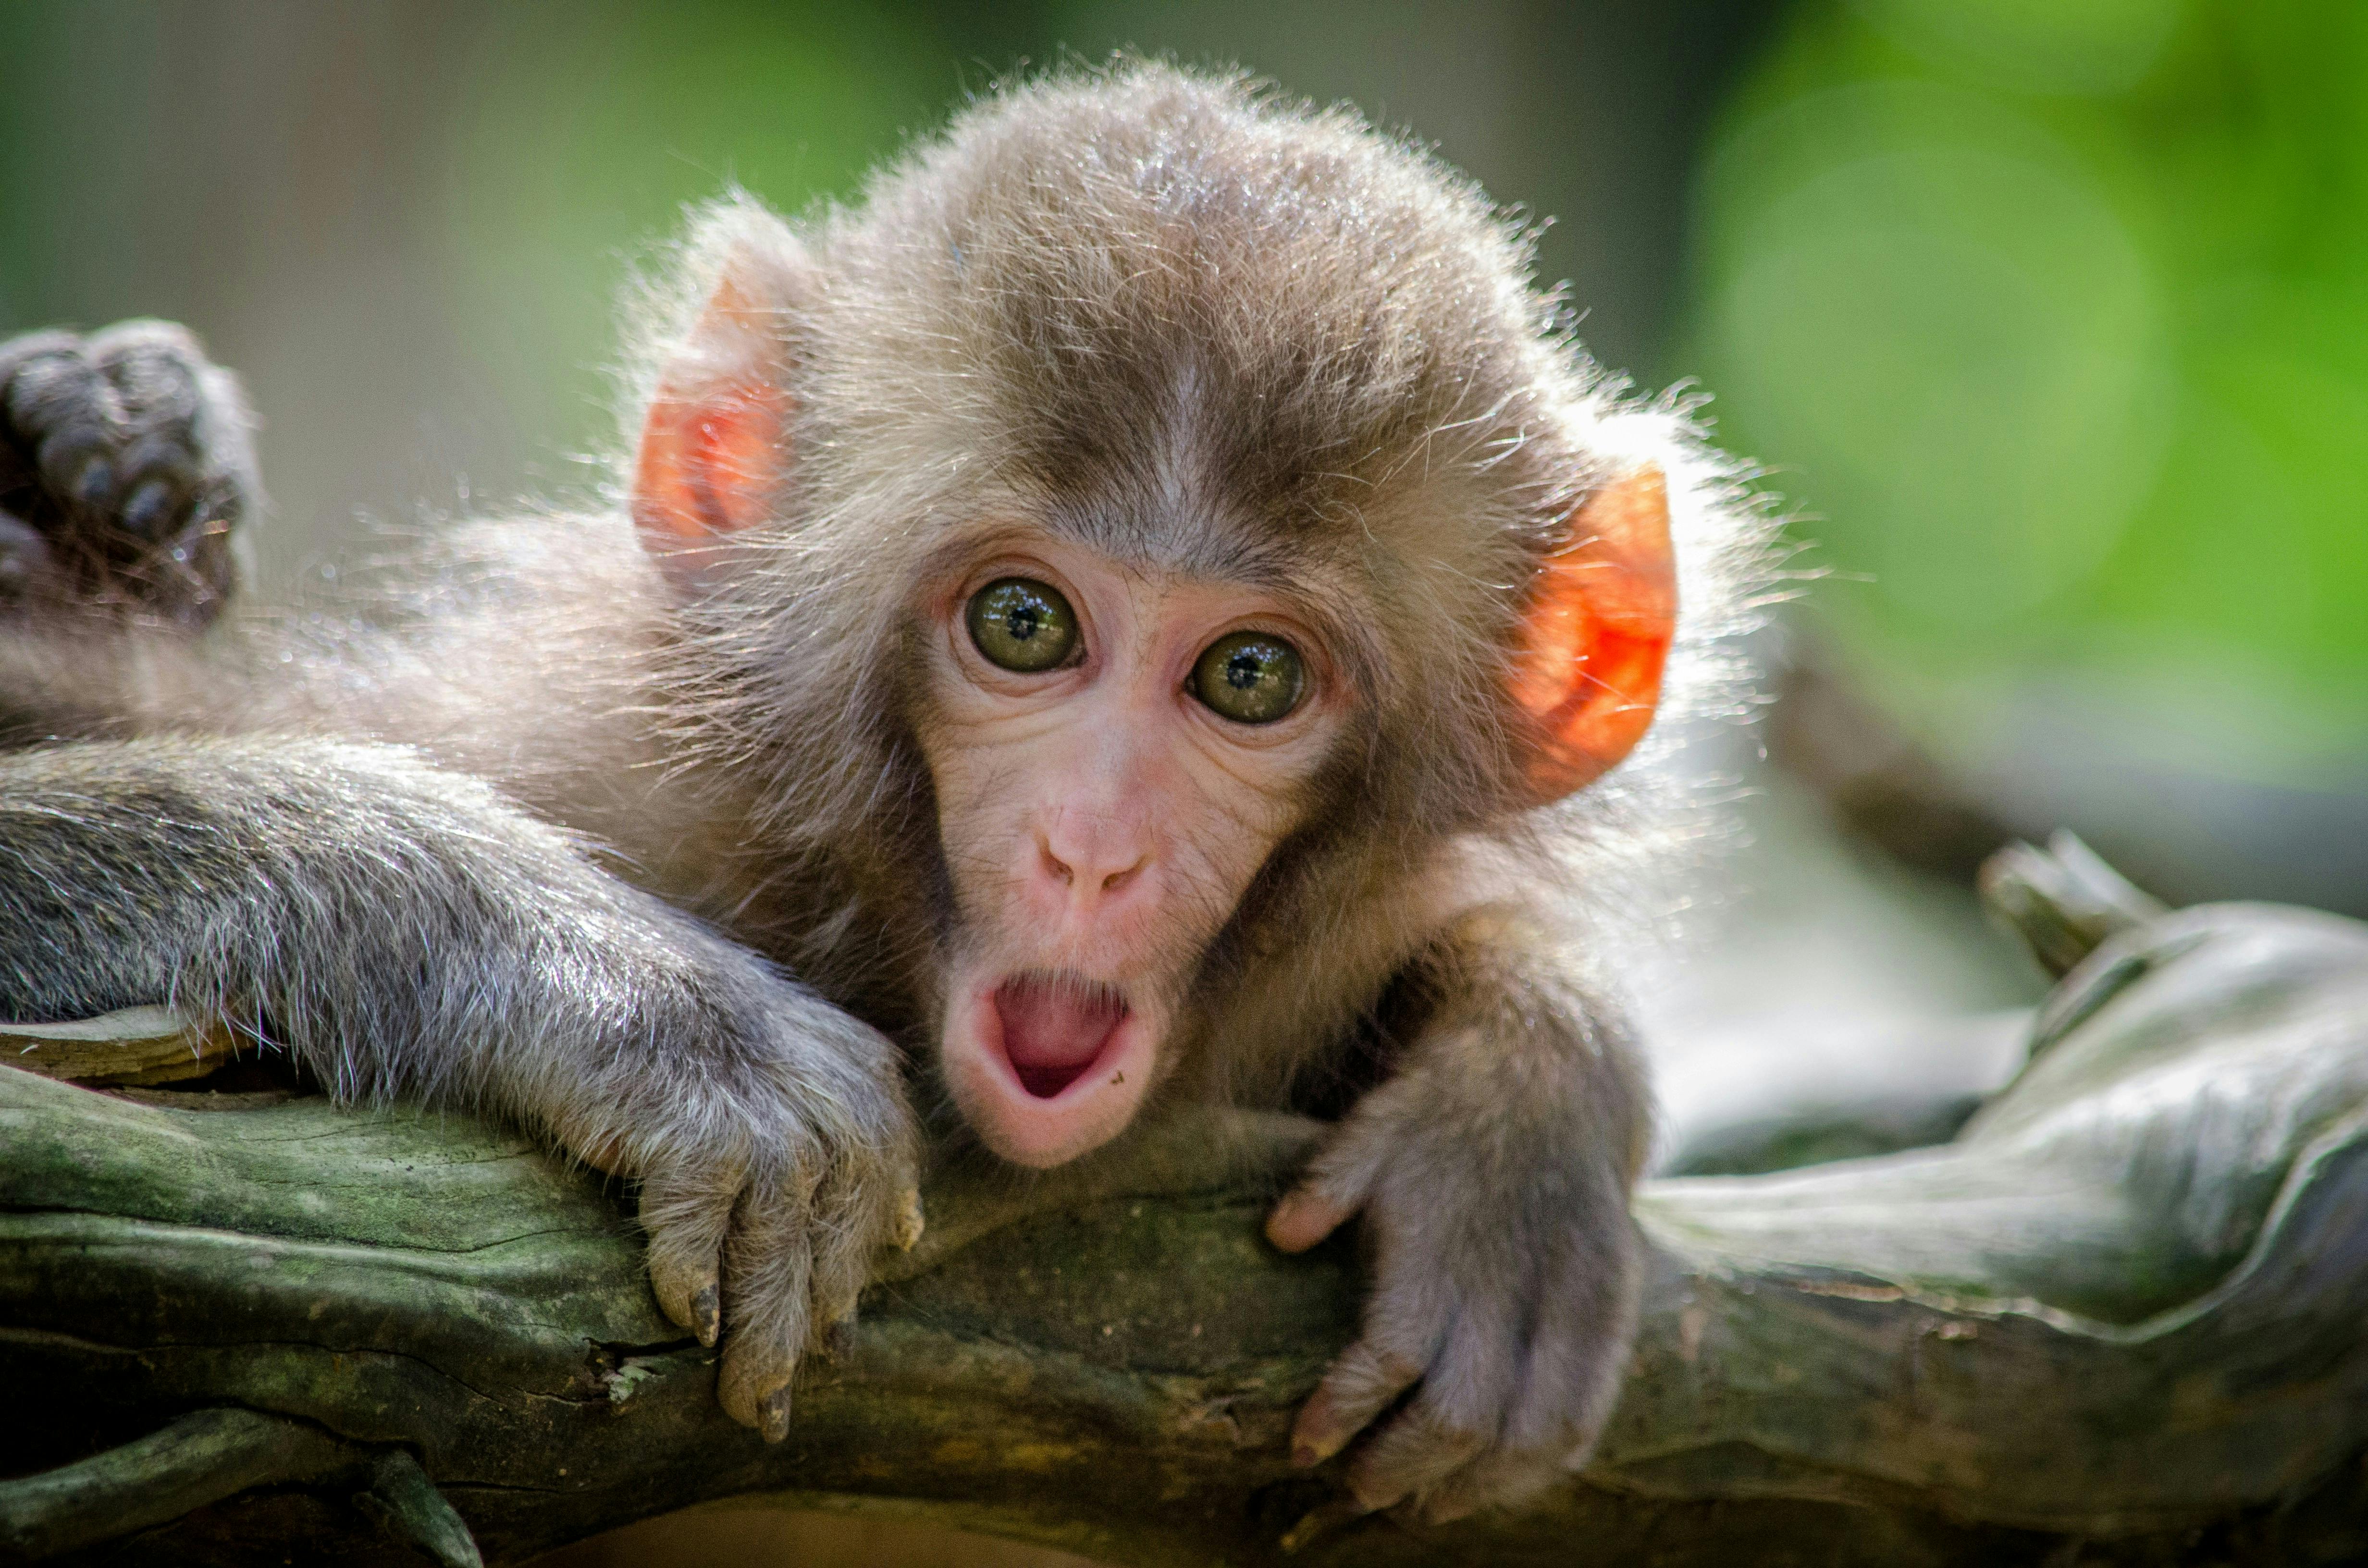 Get ready for chaotic, cheeky monkeys at Monkey forest!